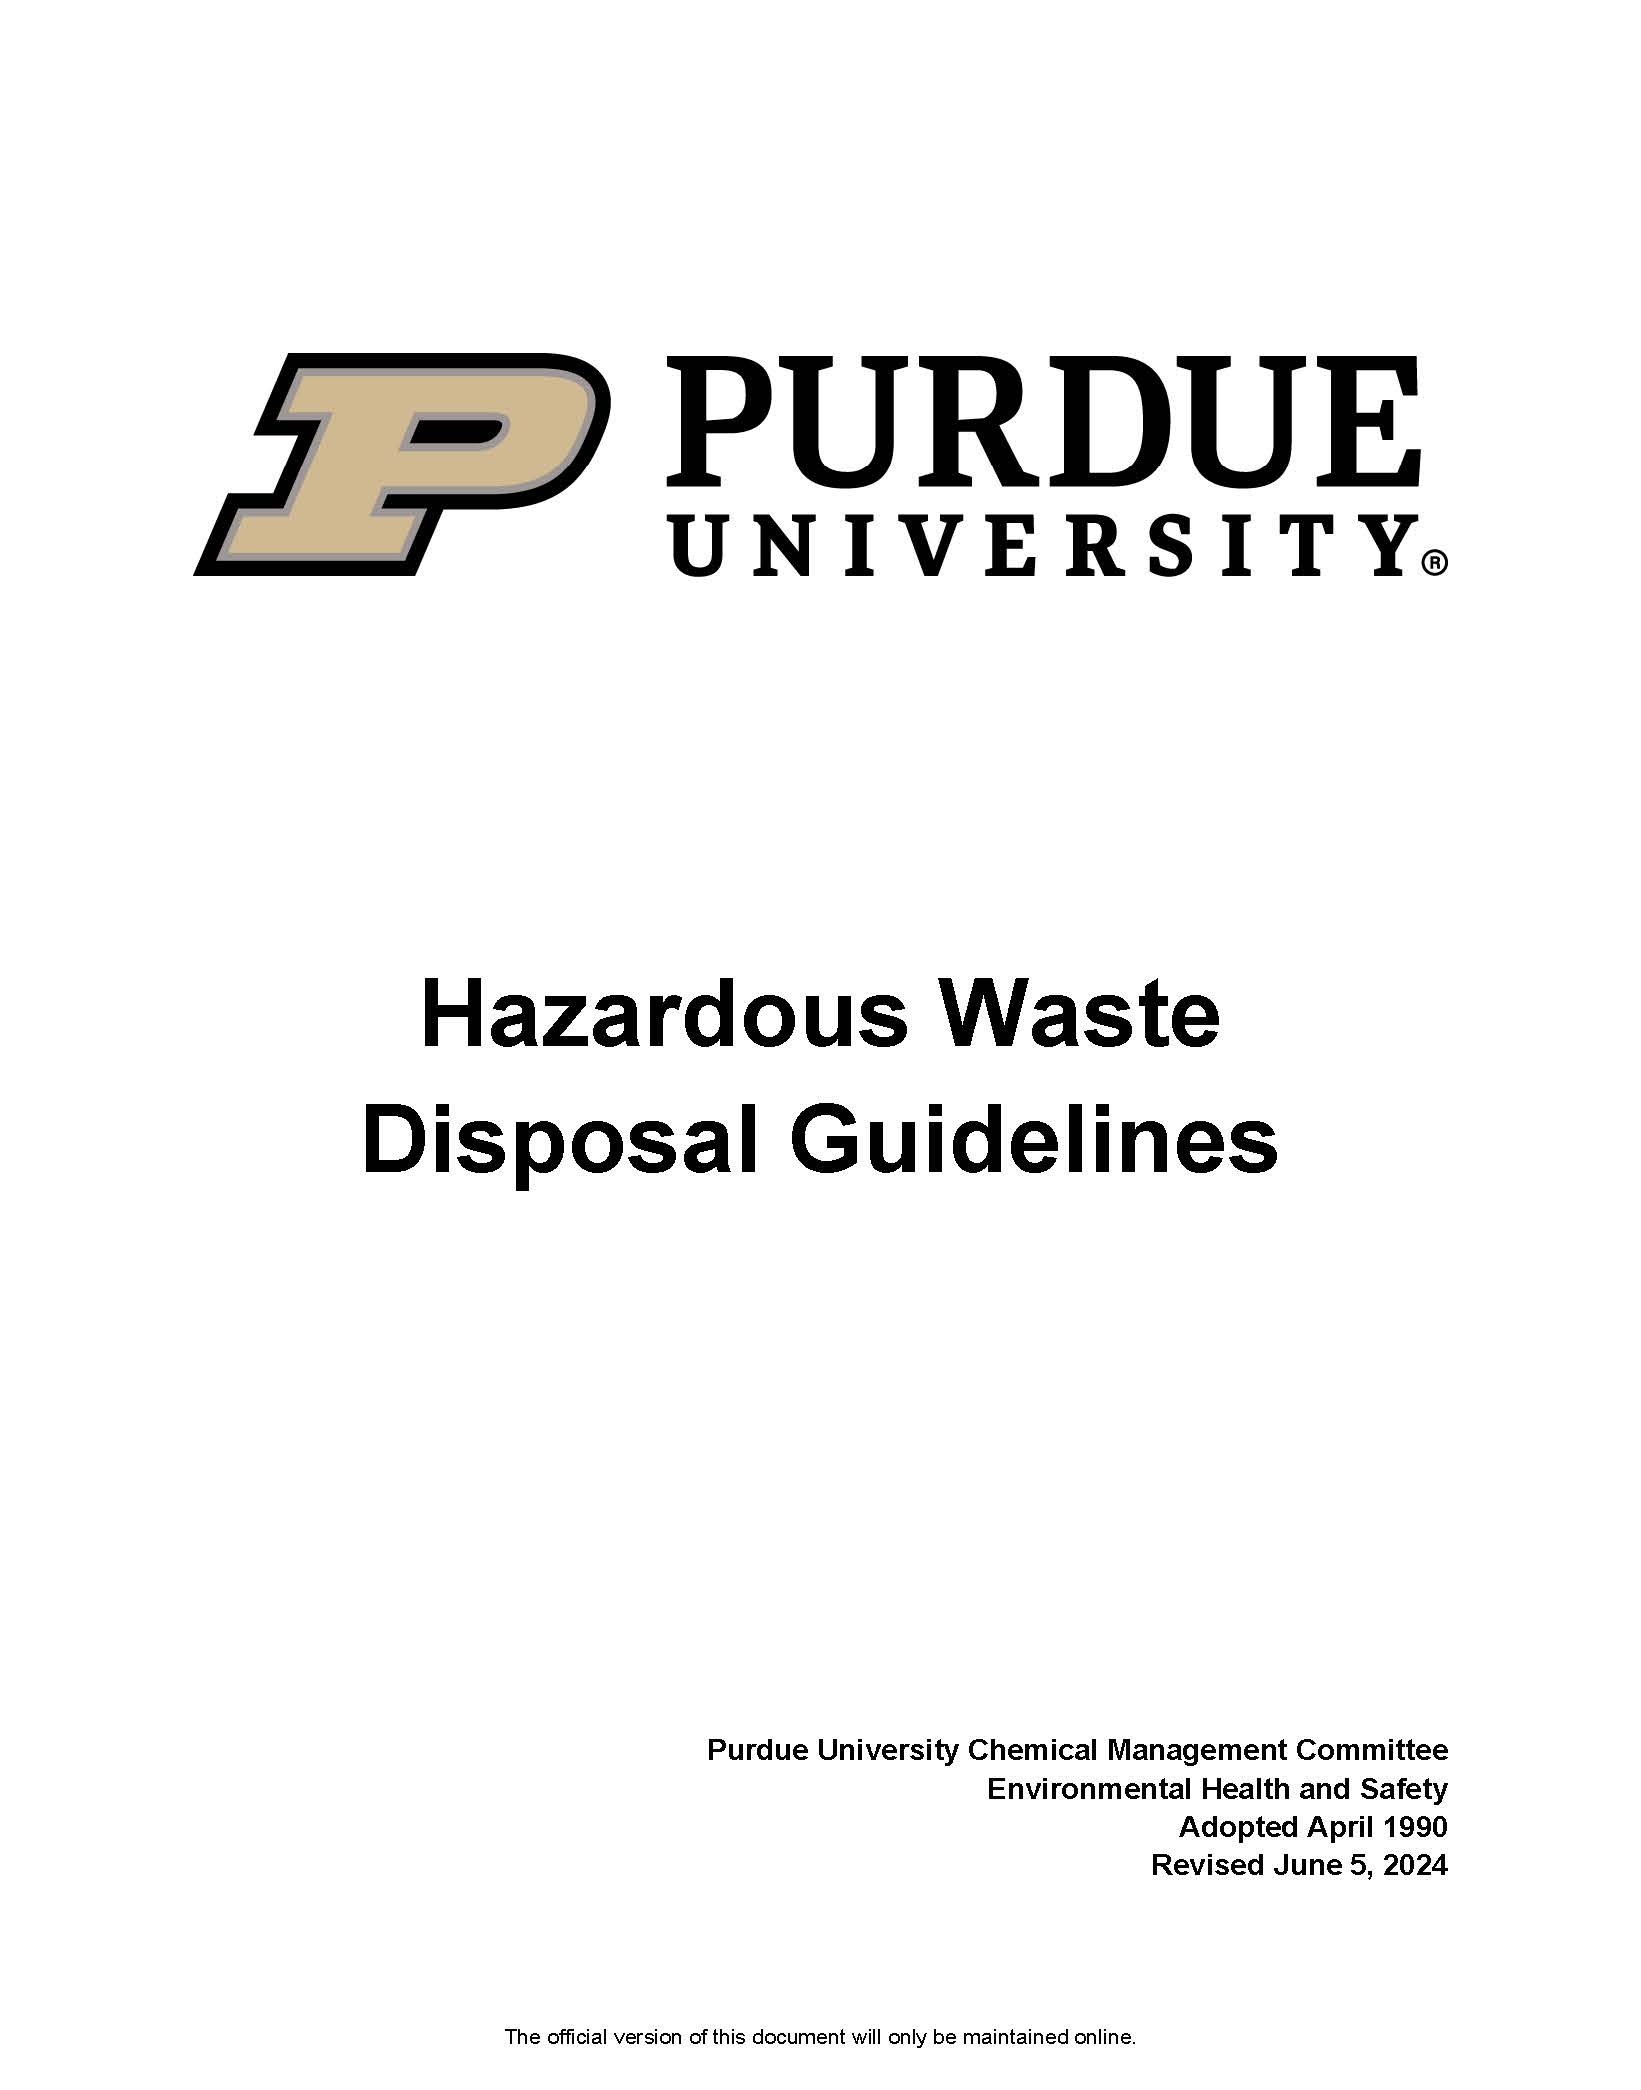 All Forms - Environmental Health and Safety - Purdue University